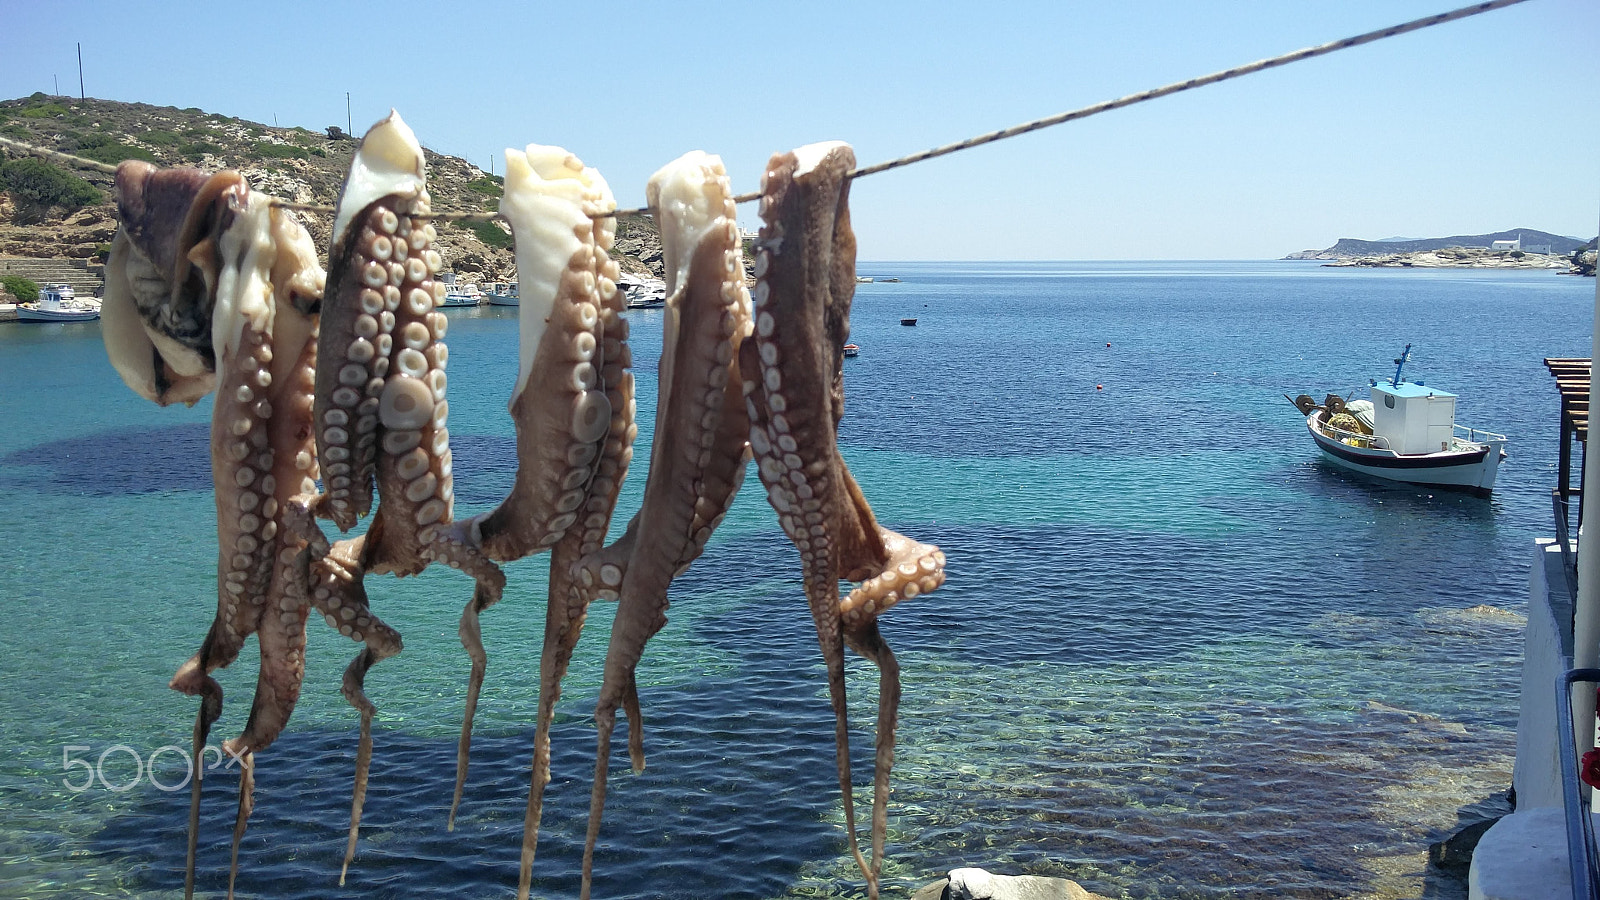 OnePlus 2 sample photo. Octopus drying in the sun photography